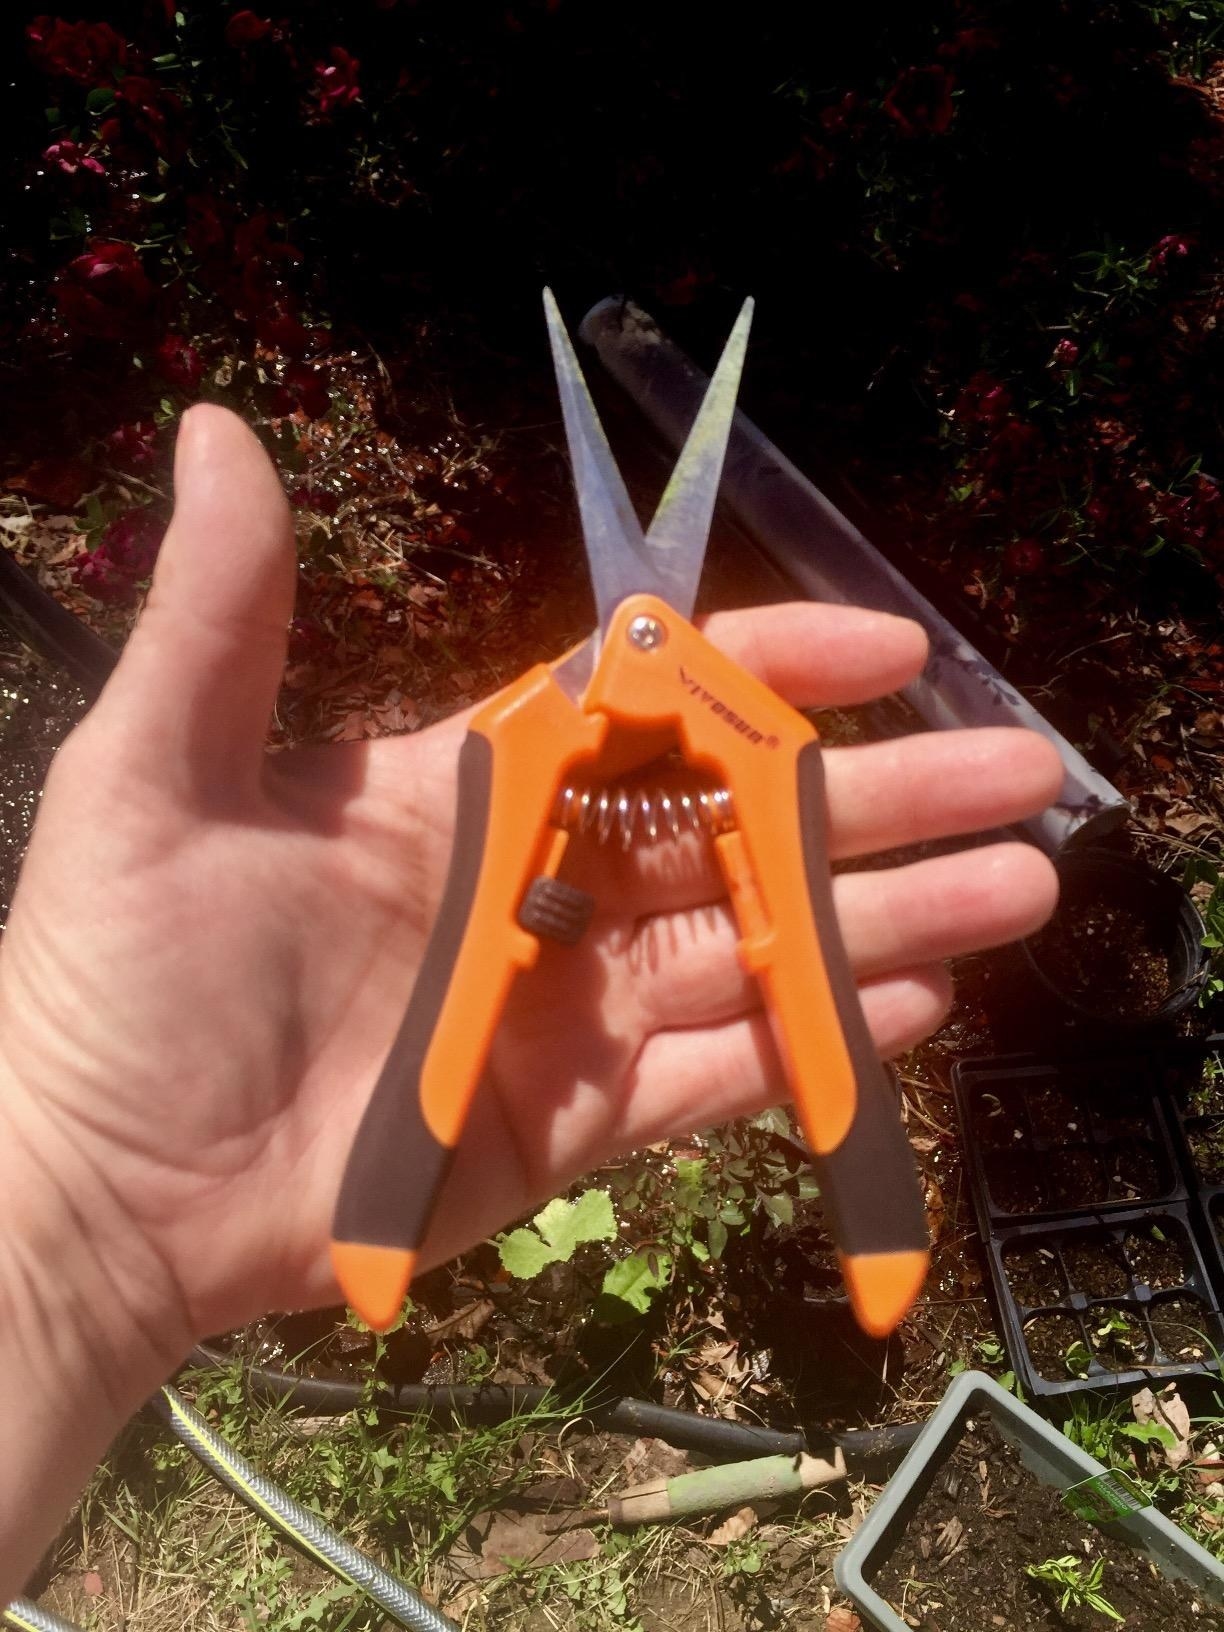 hand holds same shears with open spring over their outdoor garden